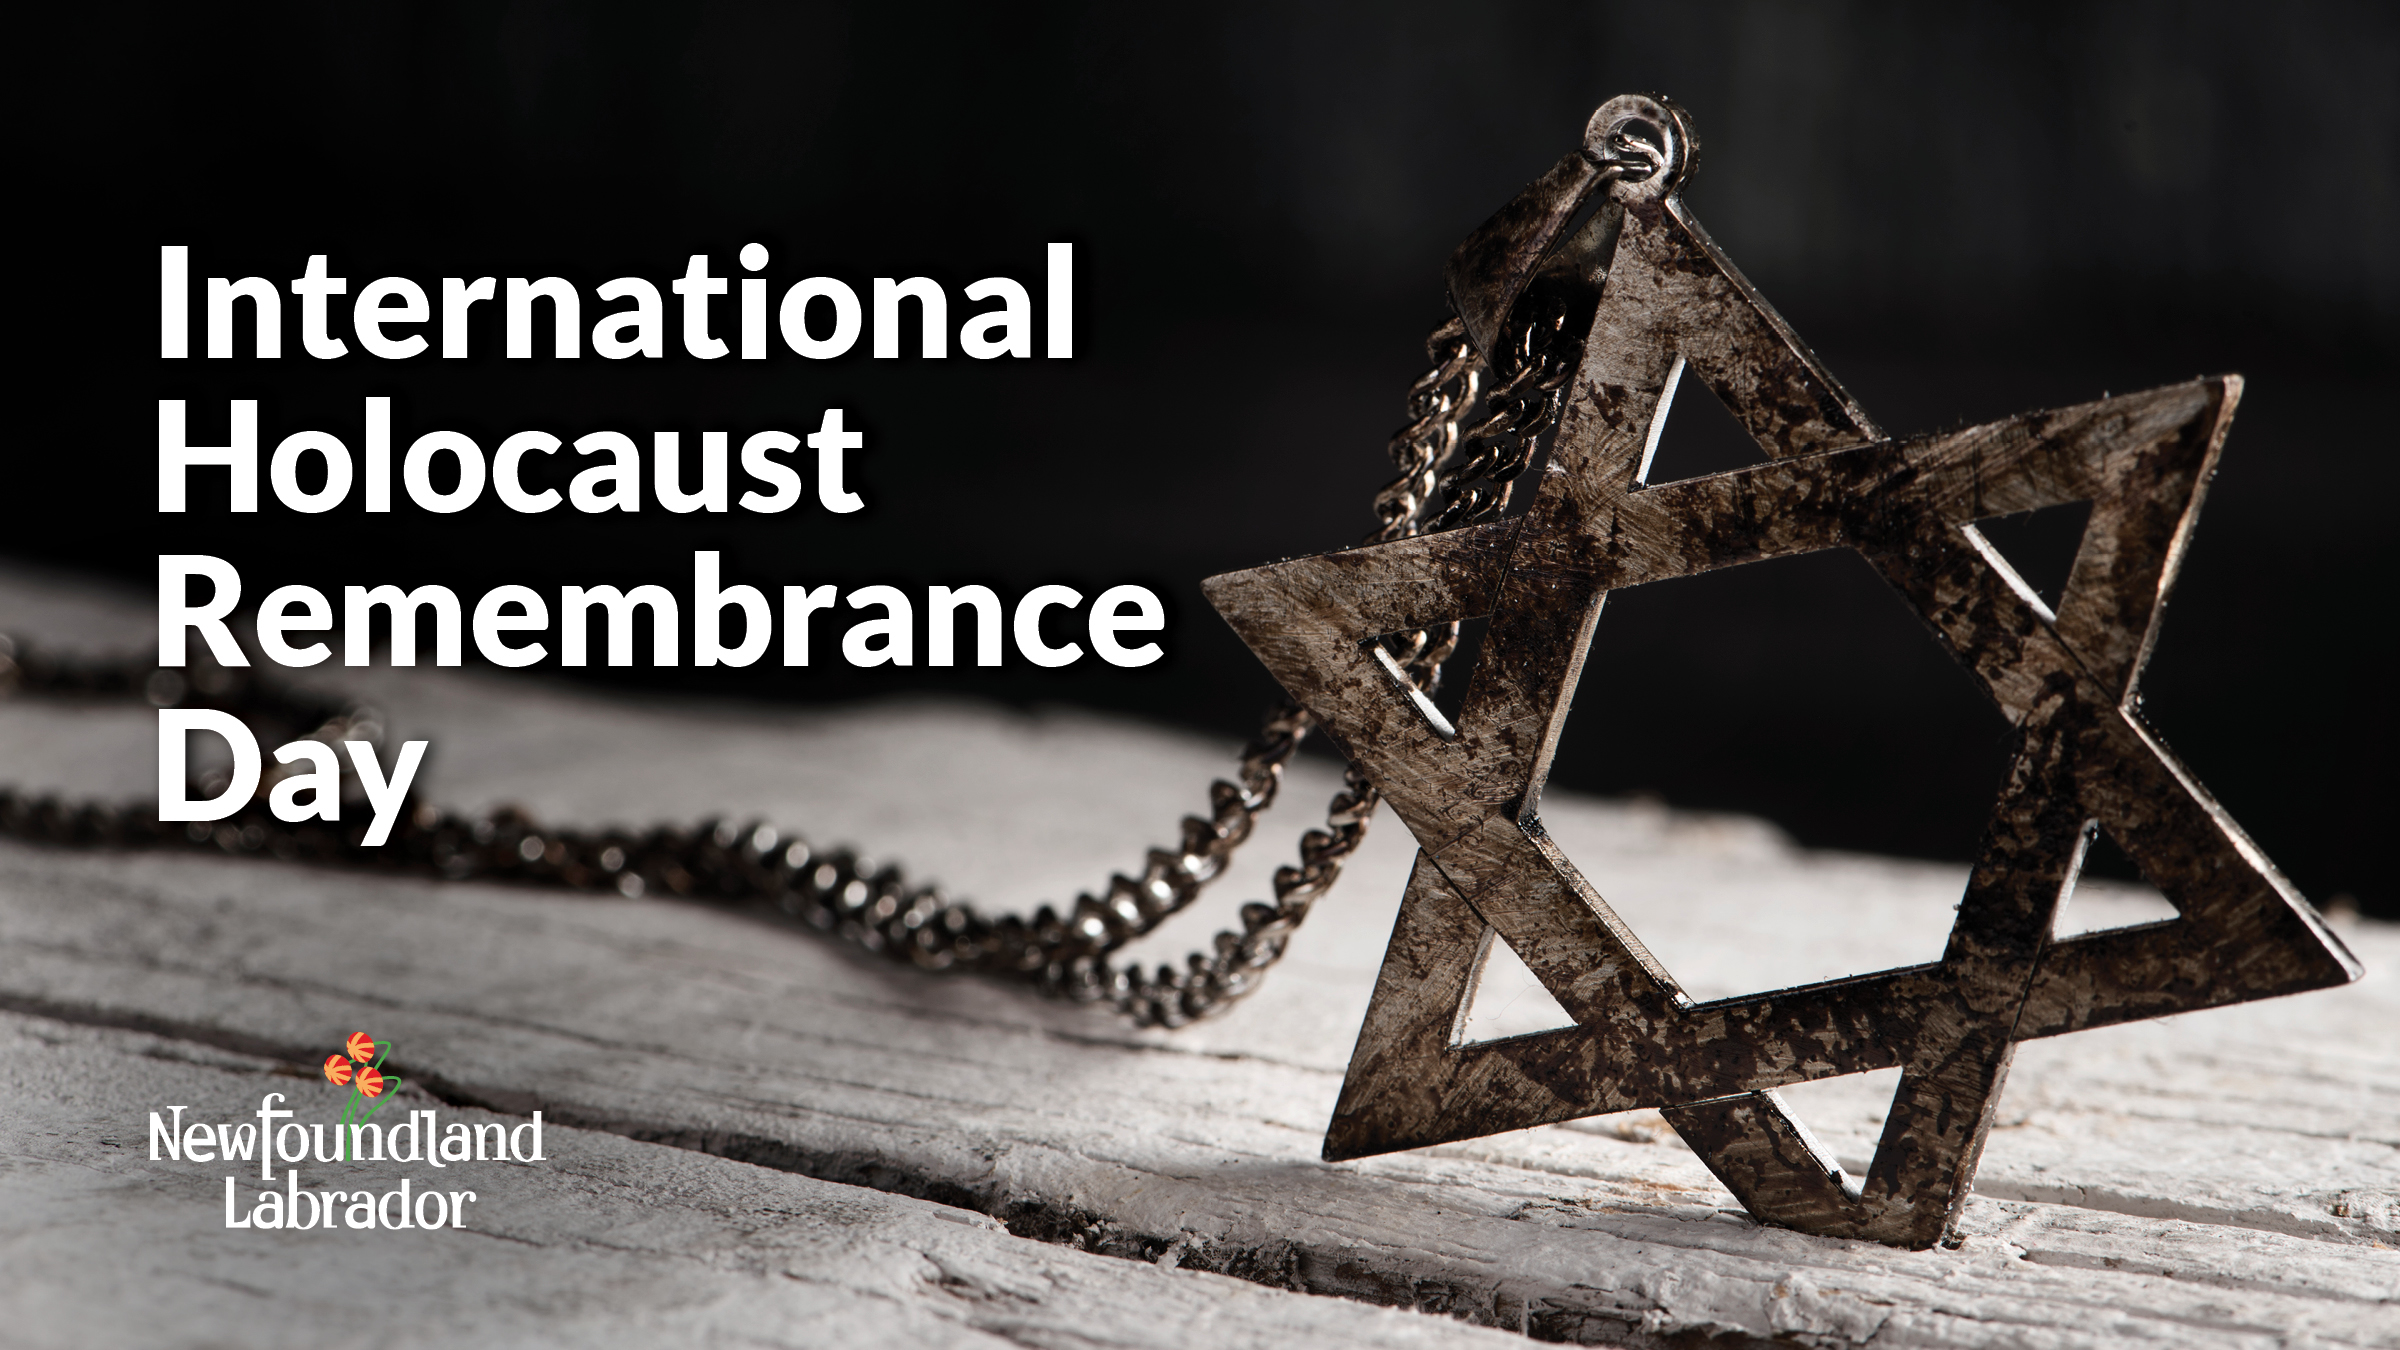 Joint Statement on International Holocaust Remembrance Day News Releases